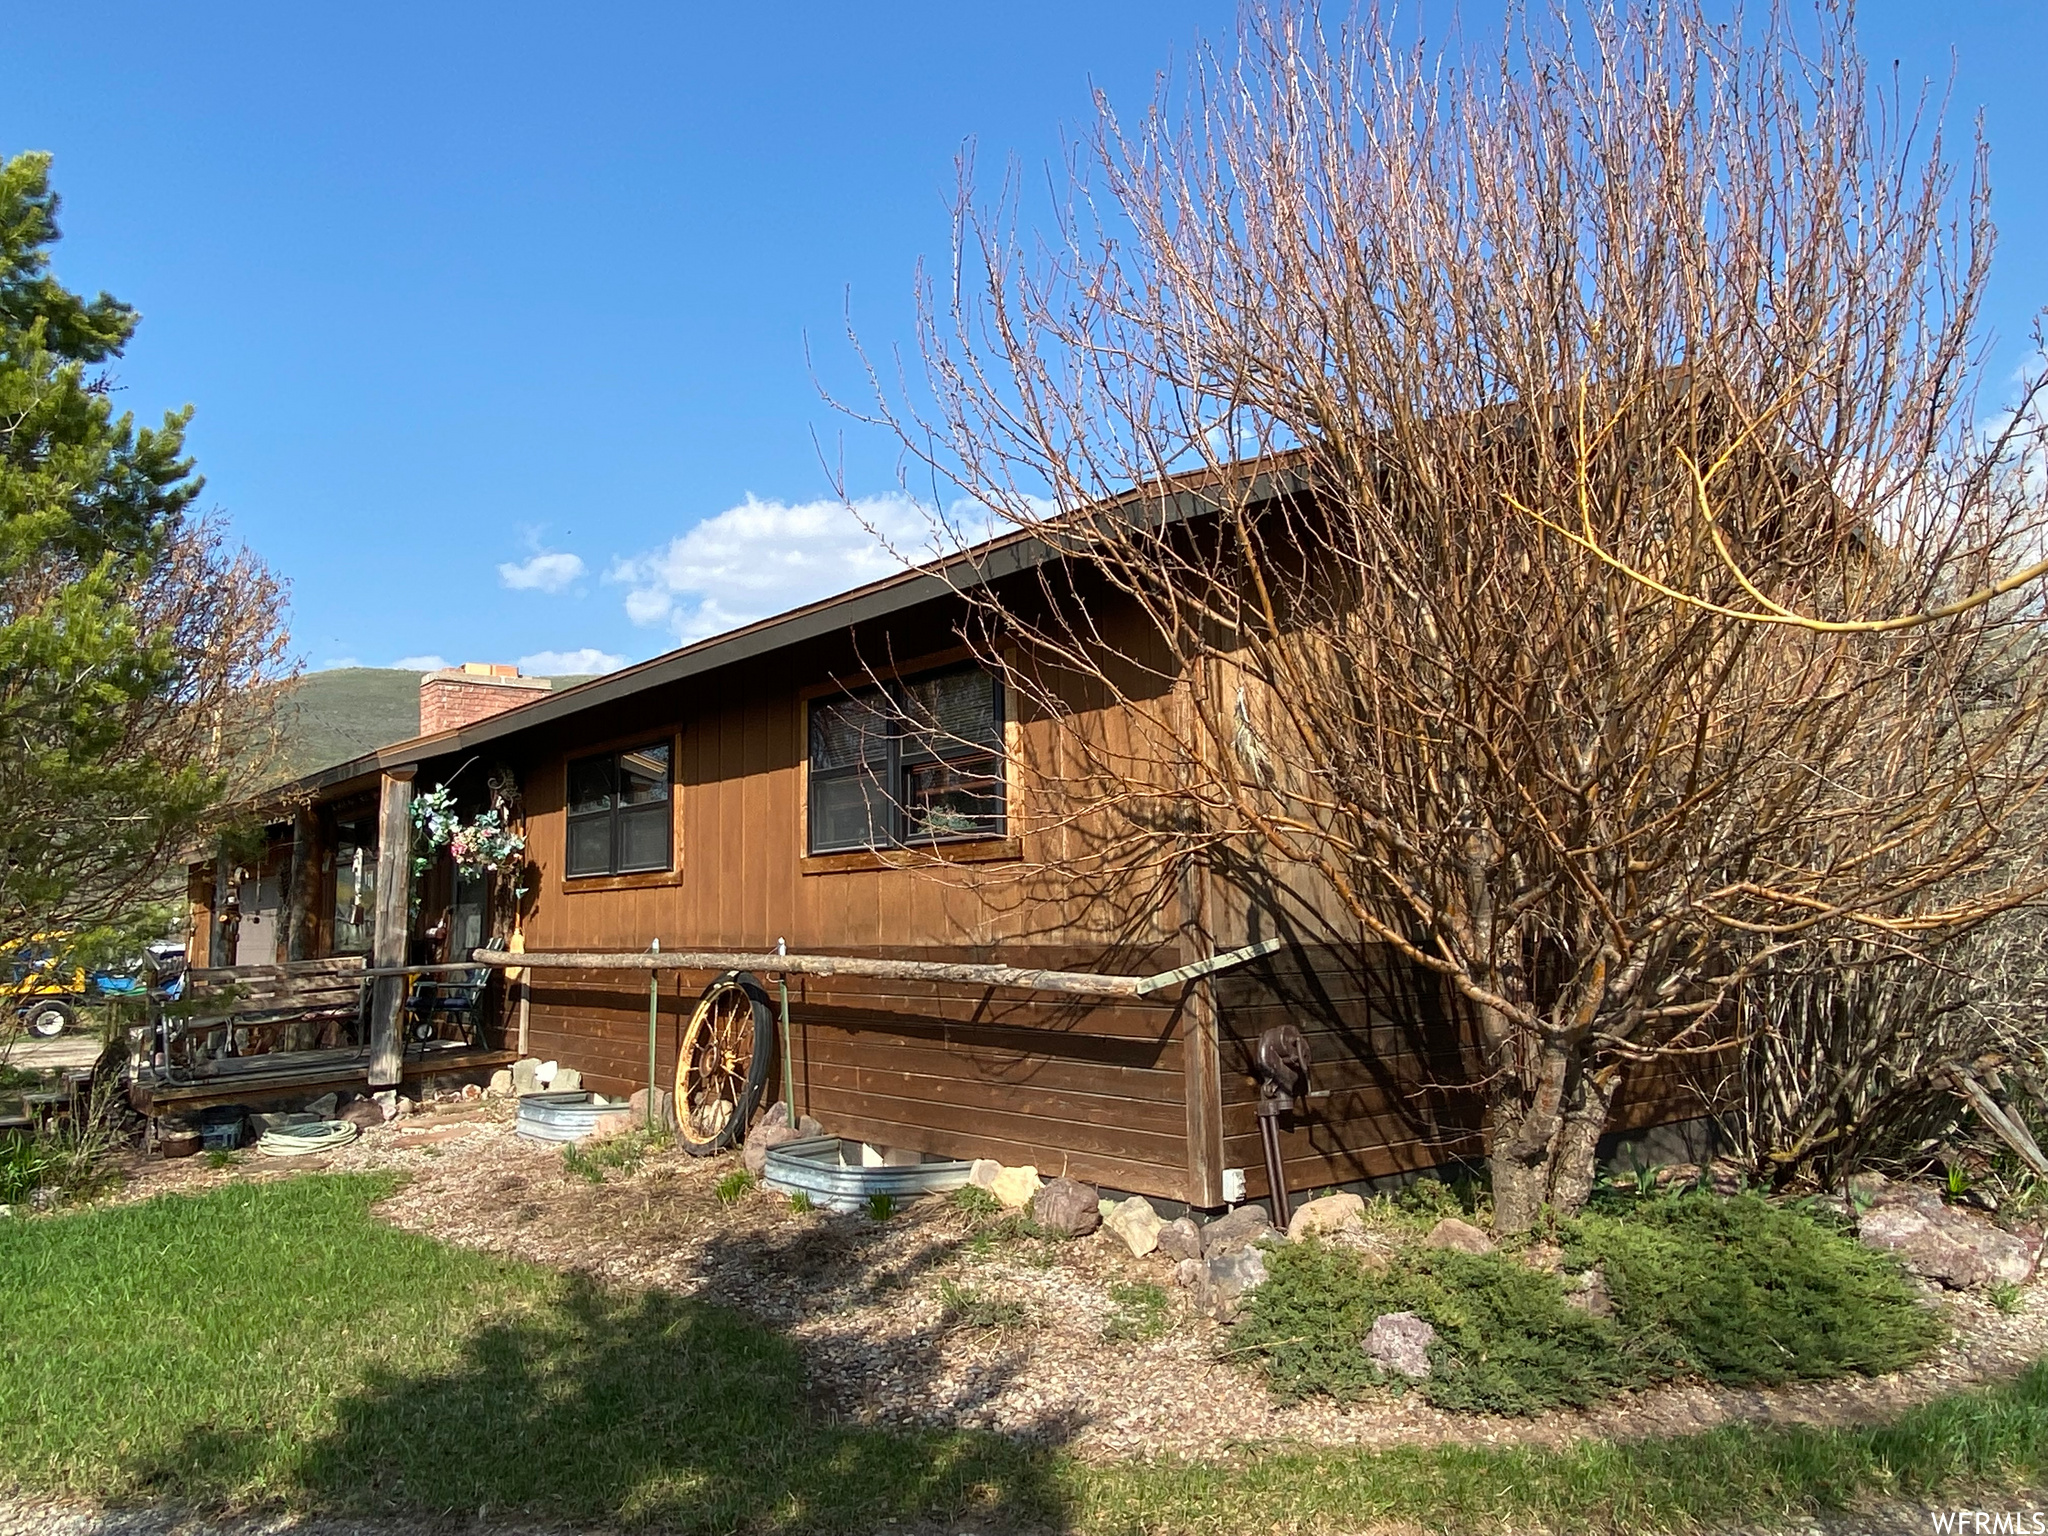 2406 SMOKEY CANYON, Auburn, Wyoming 83111, 5 Bedrooms Bedrooms, 13 Rooms Rooms,2 BathroomsBathrooms,Residential,For sale,SMOKEY CANYON,1832491